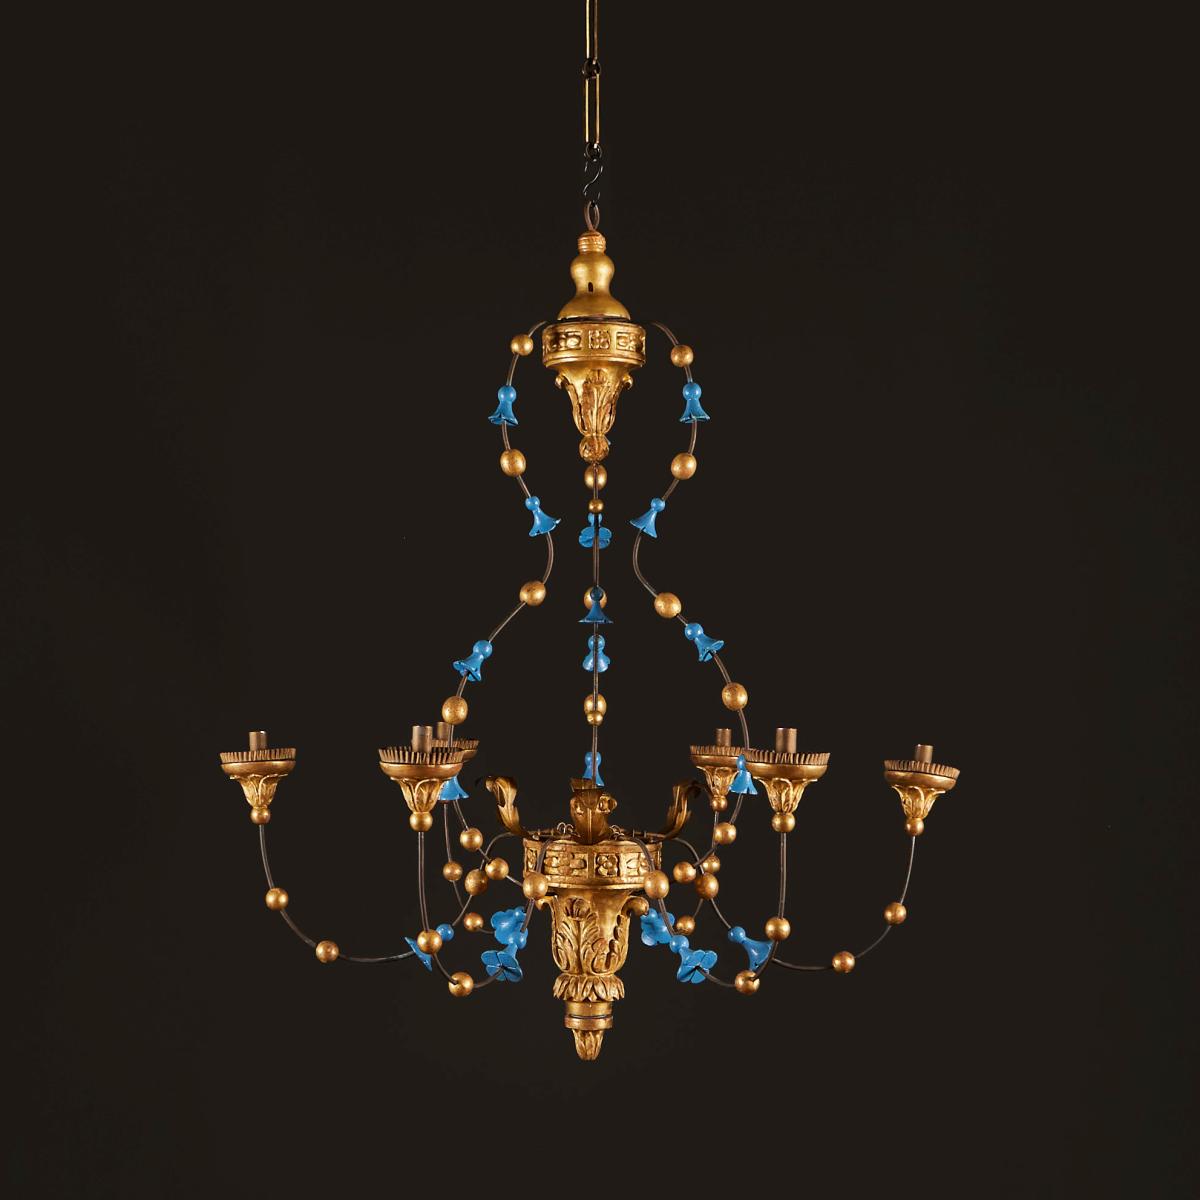 A Late 18th Century Giltwood Chandelier